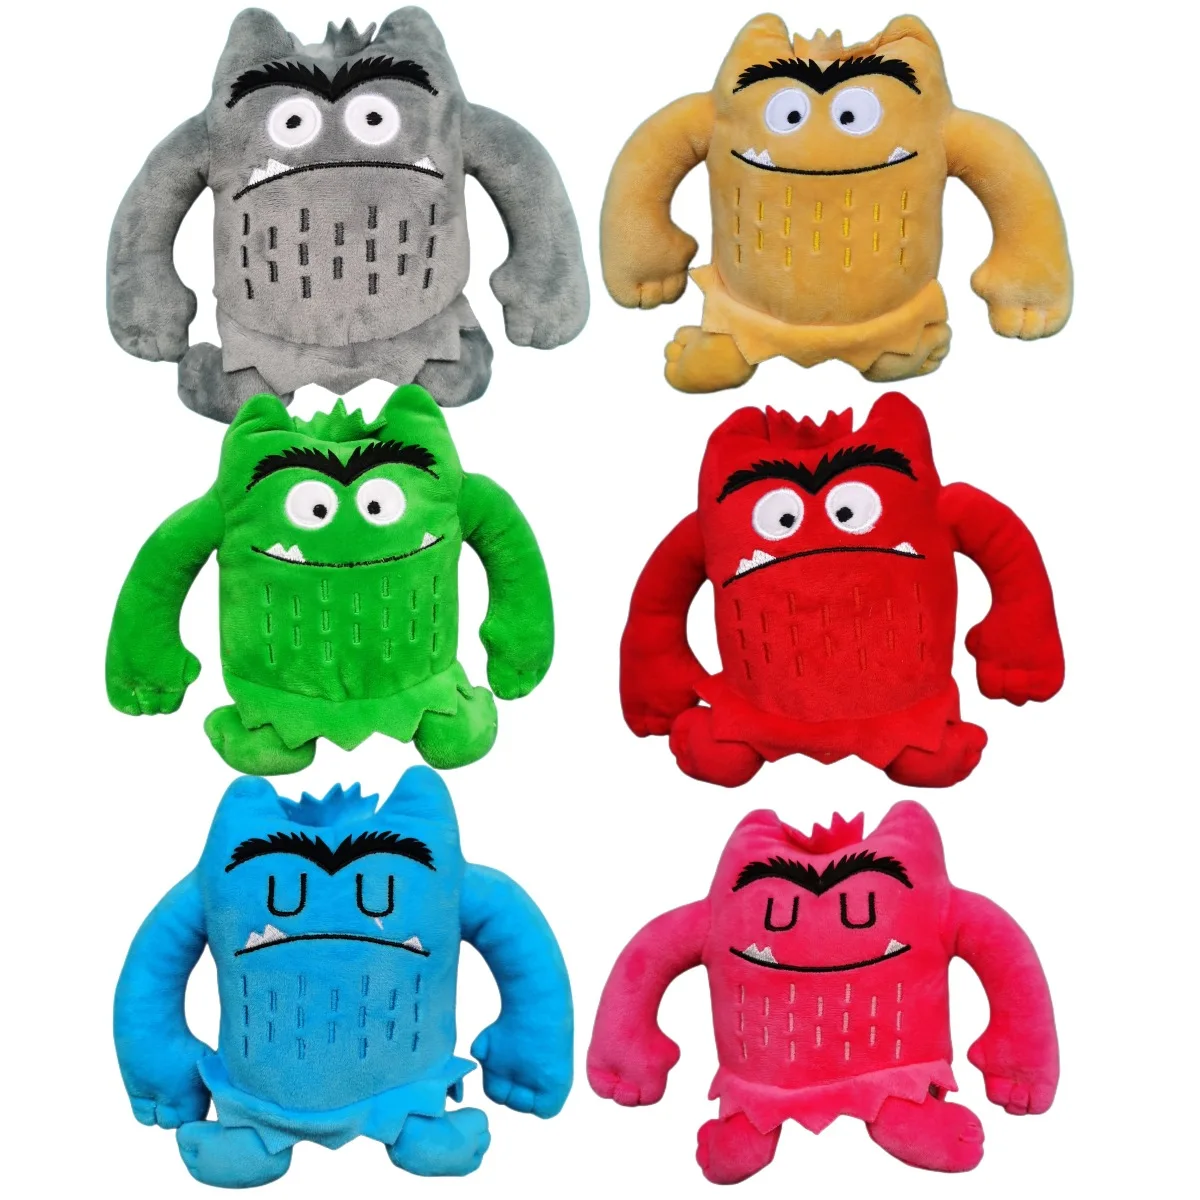 

16cm Funny Cute My Emotions Little Monster Plush Toy Cartoon Kawaii Hapiness Anger Calm Fear Sad Color Children's Birthday Gifts